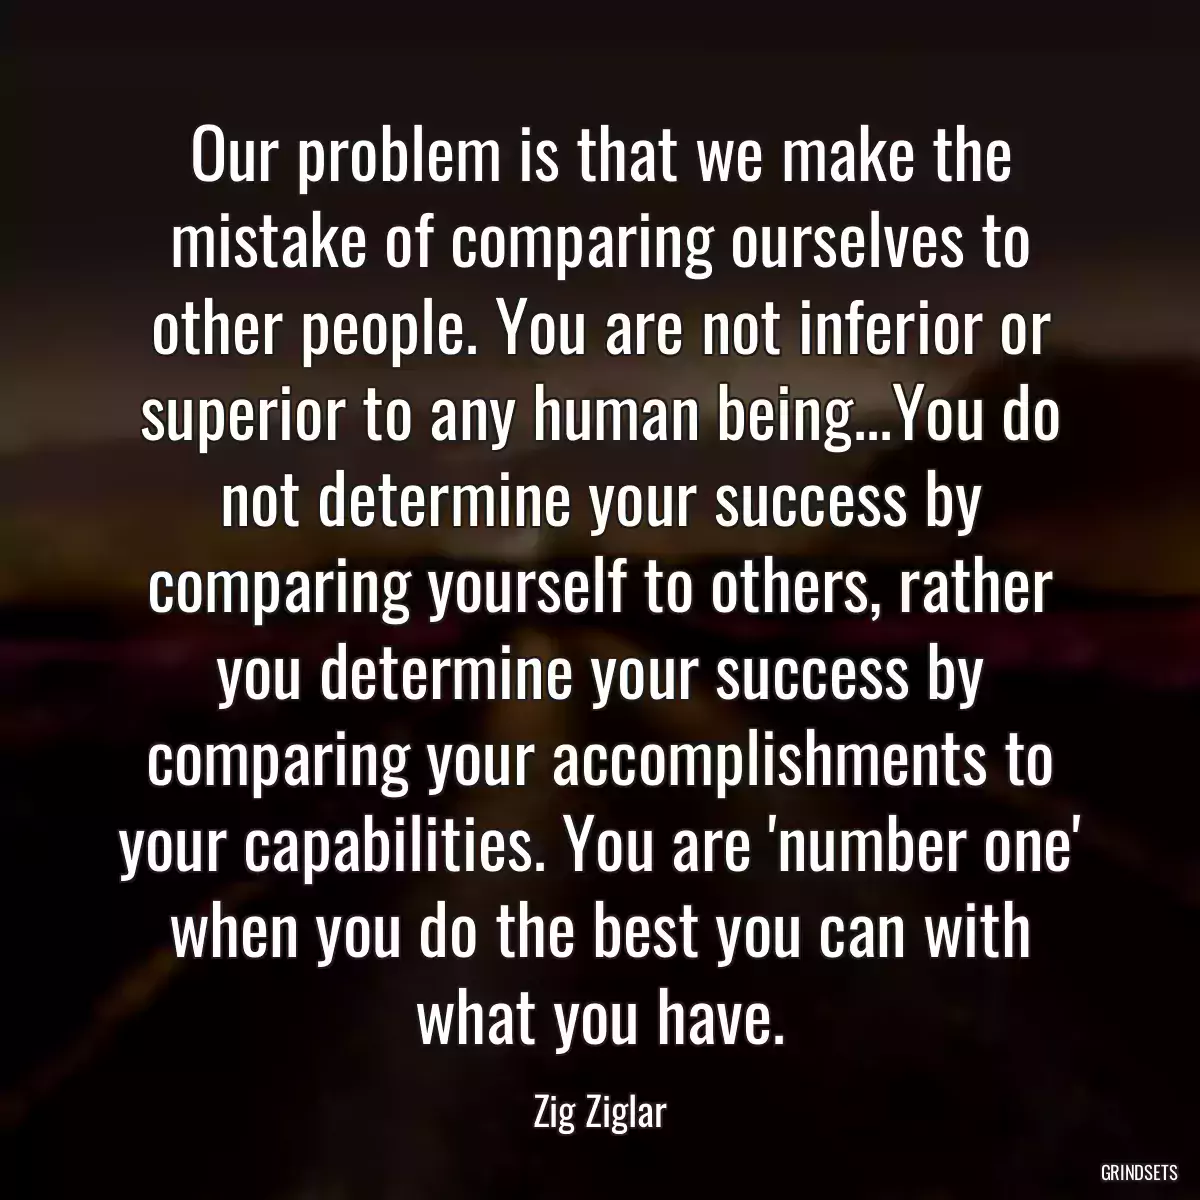 Our problem is that we make the mistake of comparing ourselves to other people. You are not inferior or superior to any human being...You do not determine your success by comparing yourself to others, rather you determine your success by comparing your accomplishments to your capabilities. You are \'number one\' when you do the best you can with what you have.